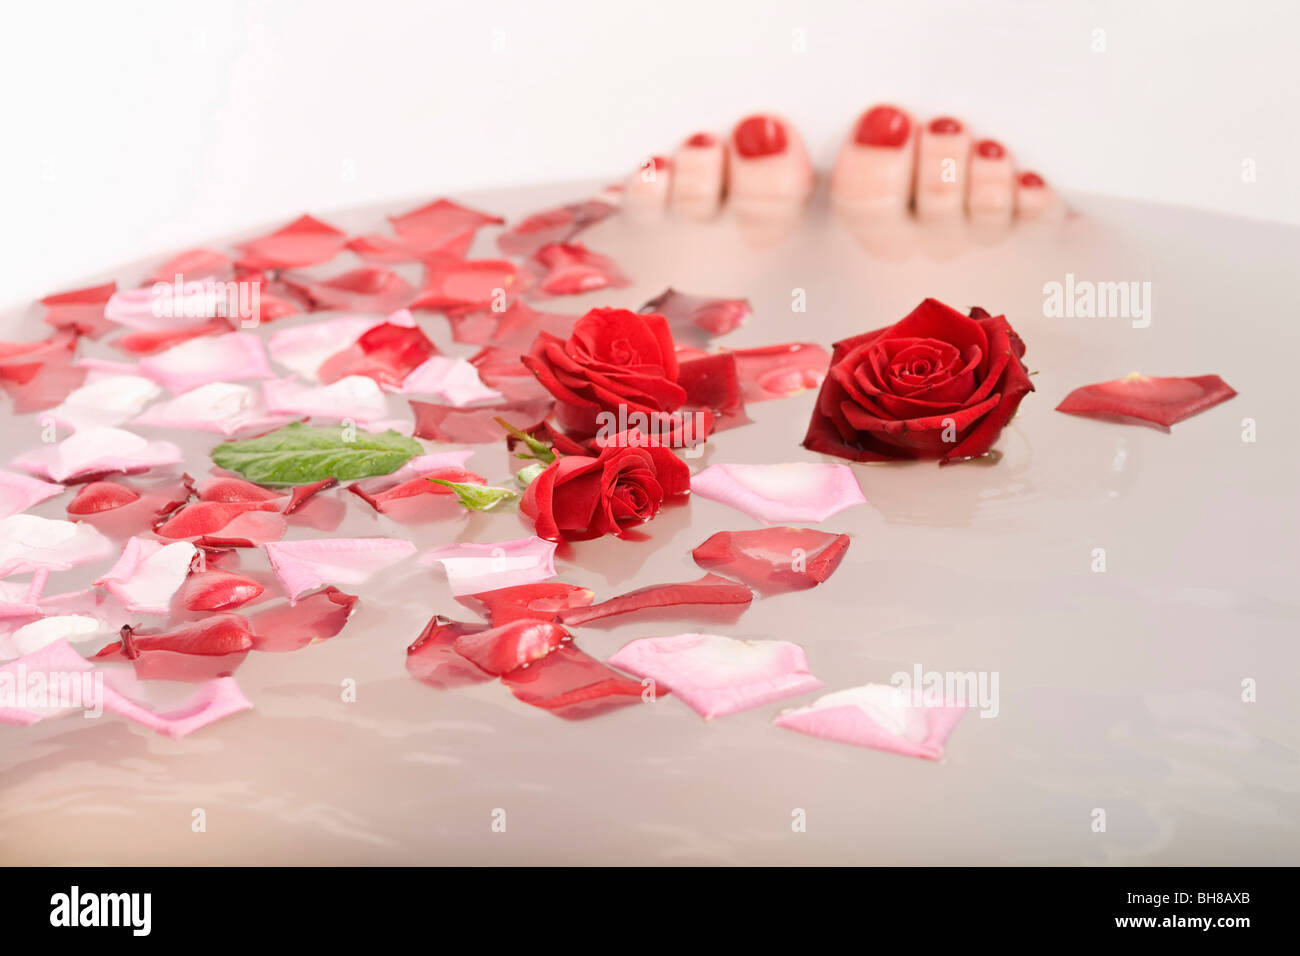 Toes poking out of bath water with rose petals and roses floating in it Stock Photo